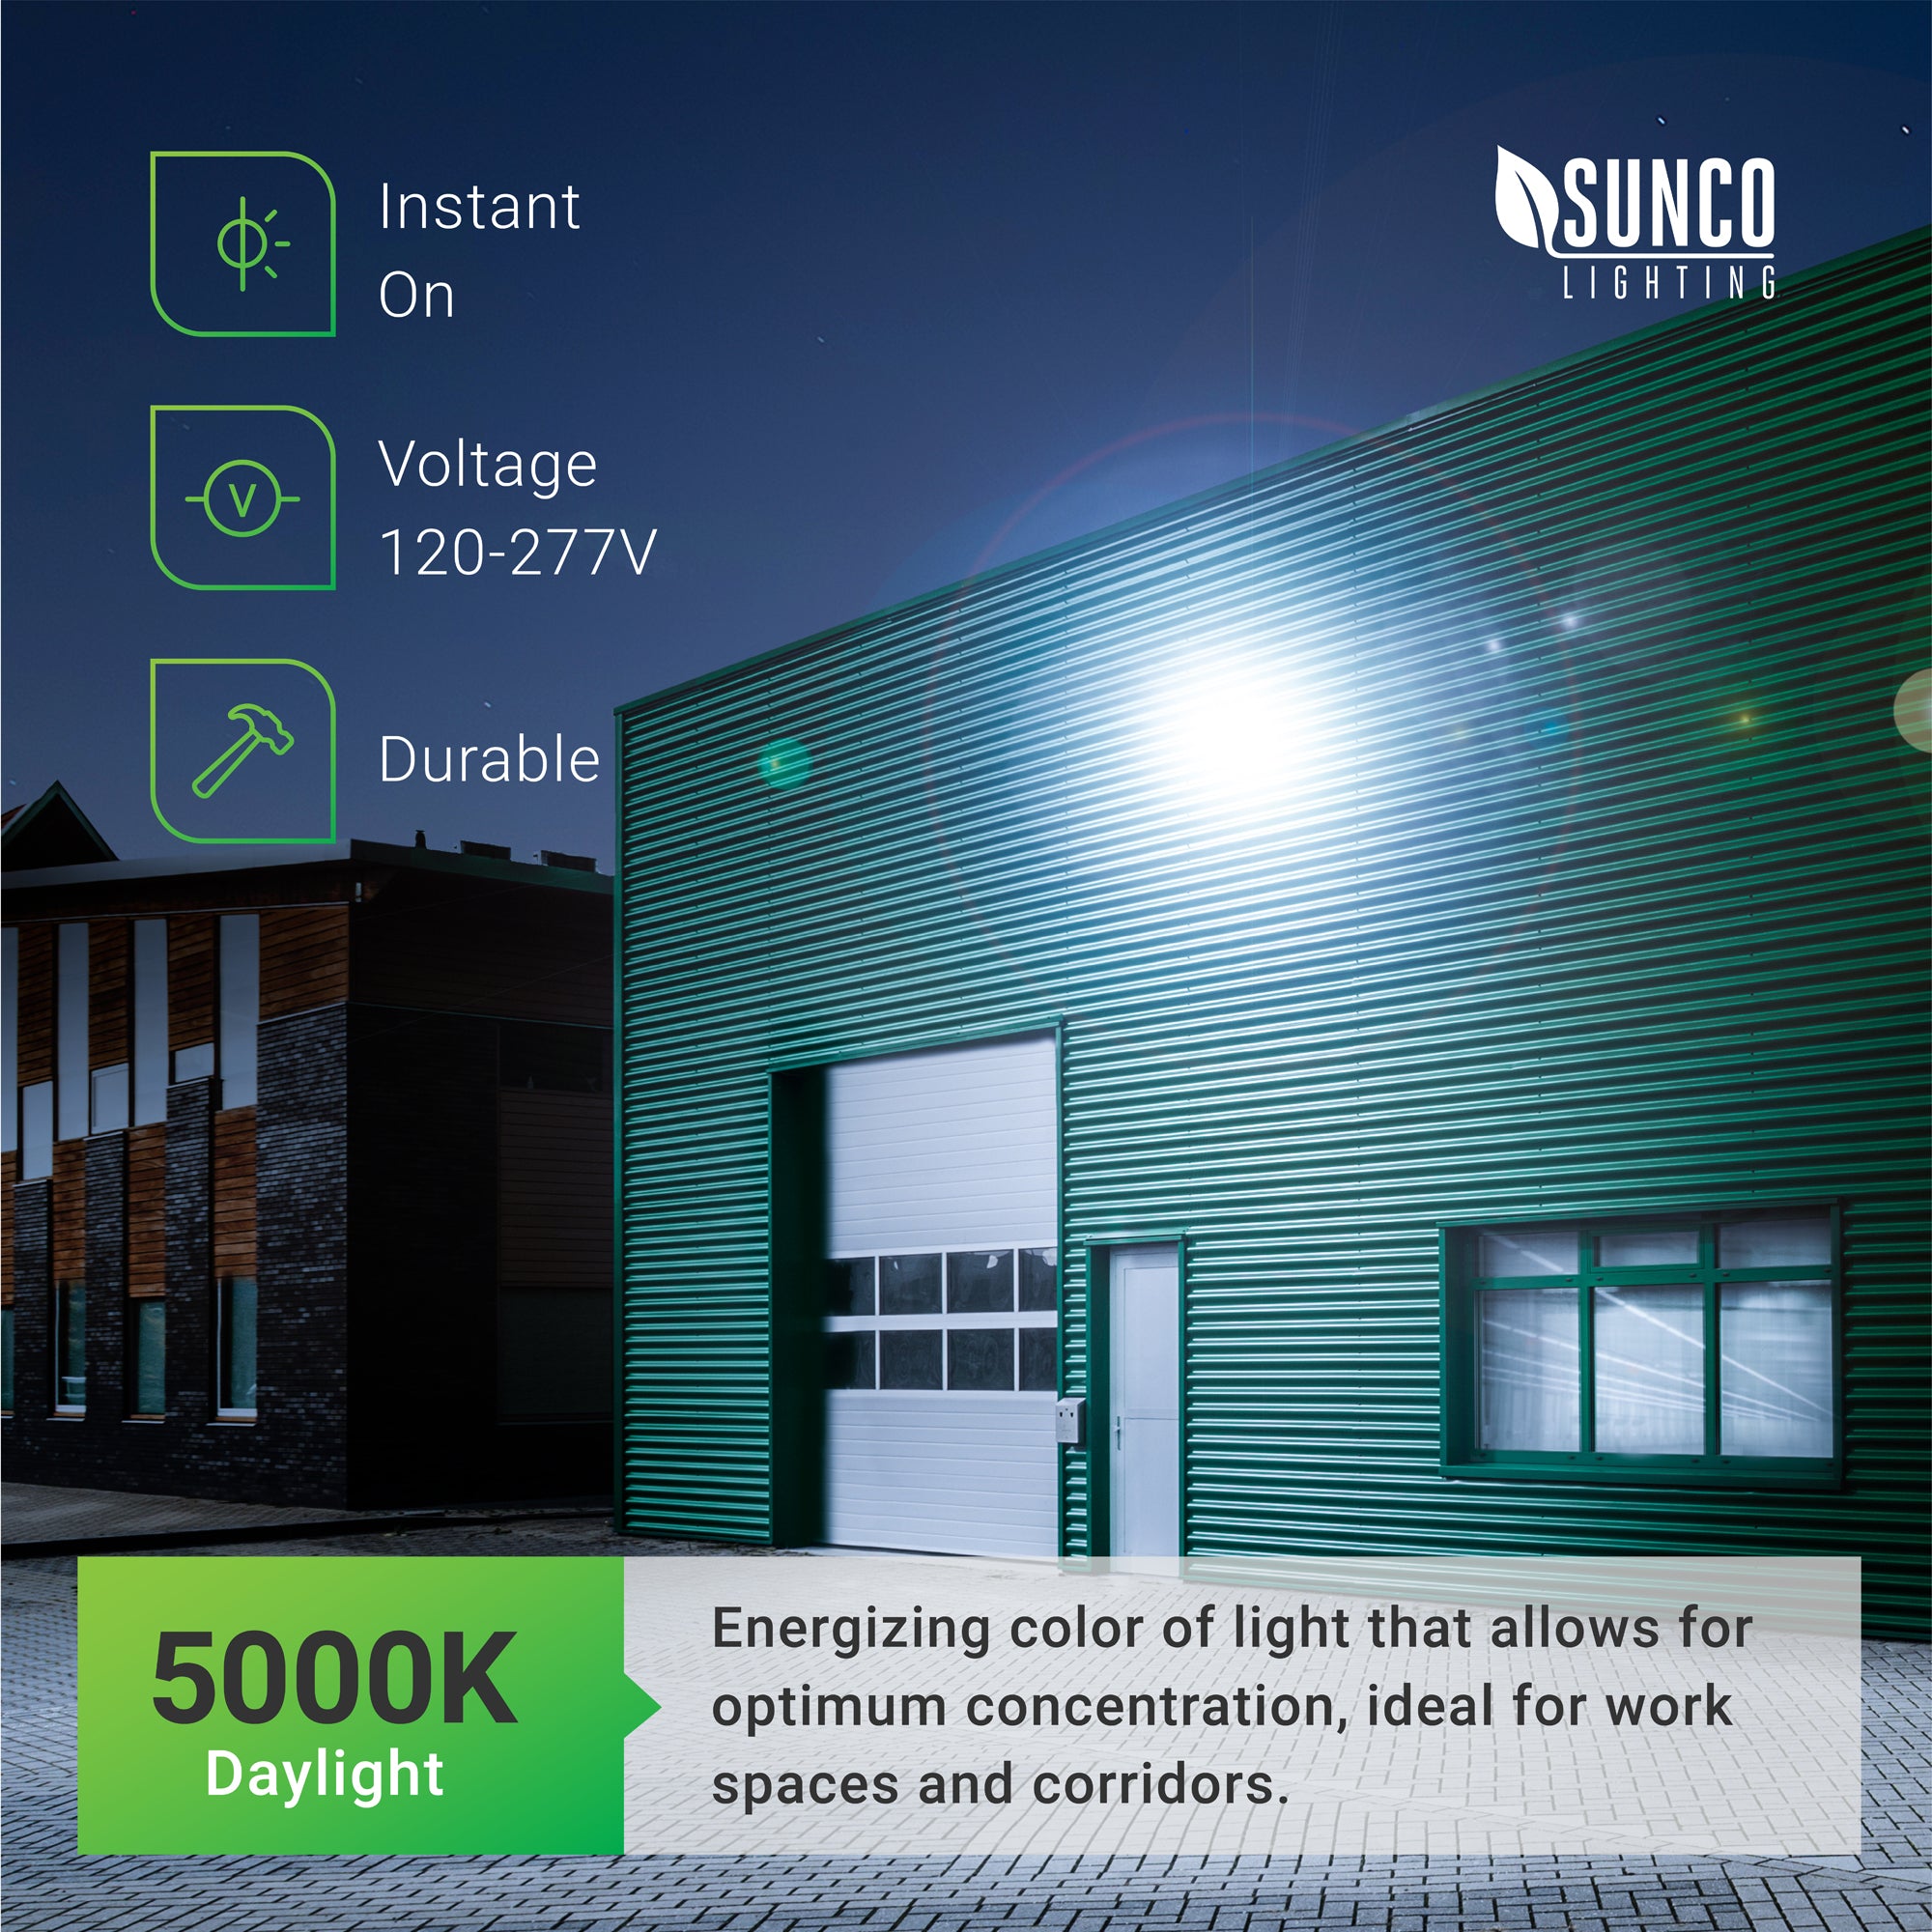 This LED Wall Pack comes in 5000K Daylight color temperature. It features 12,000 lumens brightness, consumes 120W, and runs on 120-277V for a reliable exterior security and flood light. Image shows the exterior of a commercial warehouse with a roll door. The bright, 120W LED Wall Pack provides essential light at night for improved workplace safety.